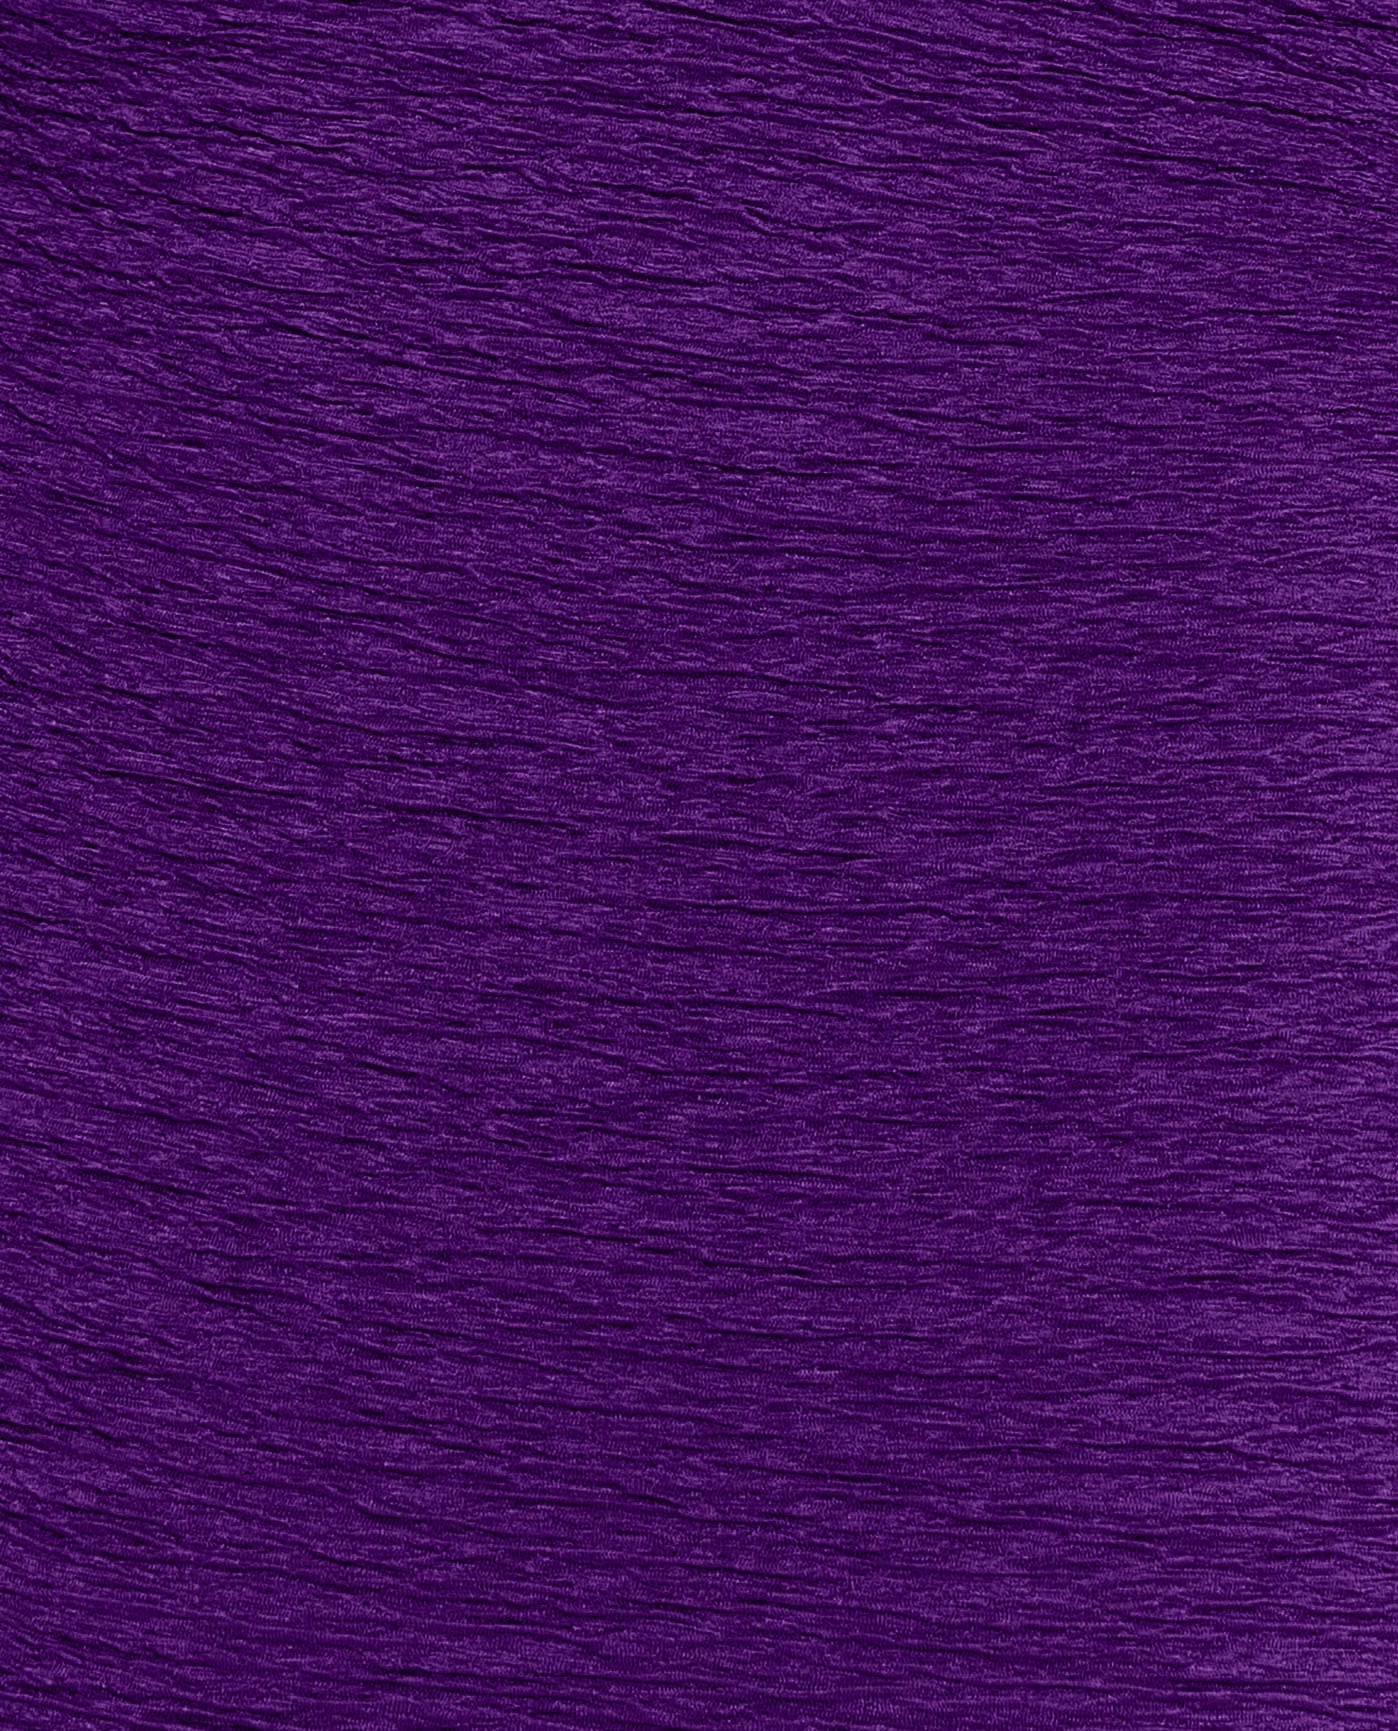 FABRIC SWATCH VIEW OF CHLORINE RESISTANT KRINKLE TEXTURED SOLID CROSS BACK PLUS SIZE ONE PIECE | KRINKLE ACAI PURPLE